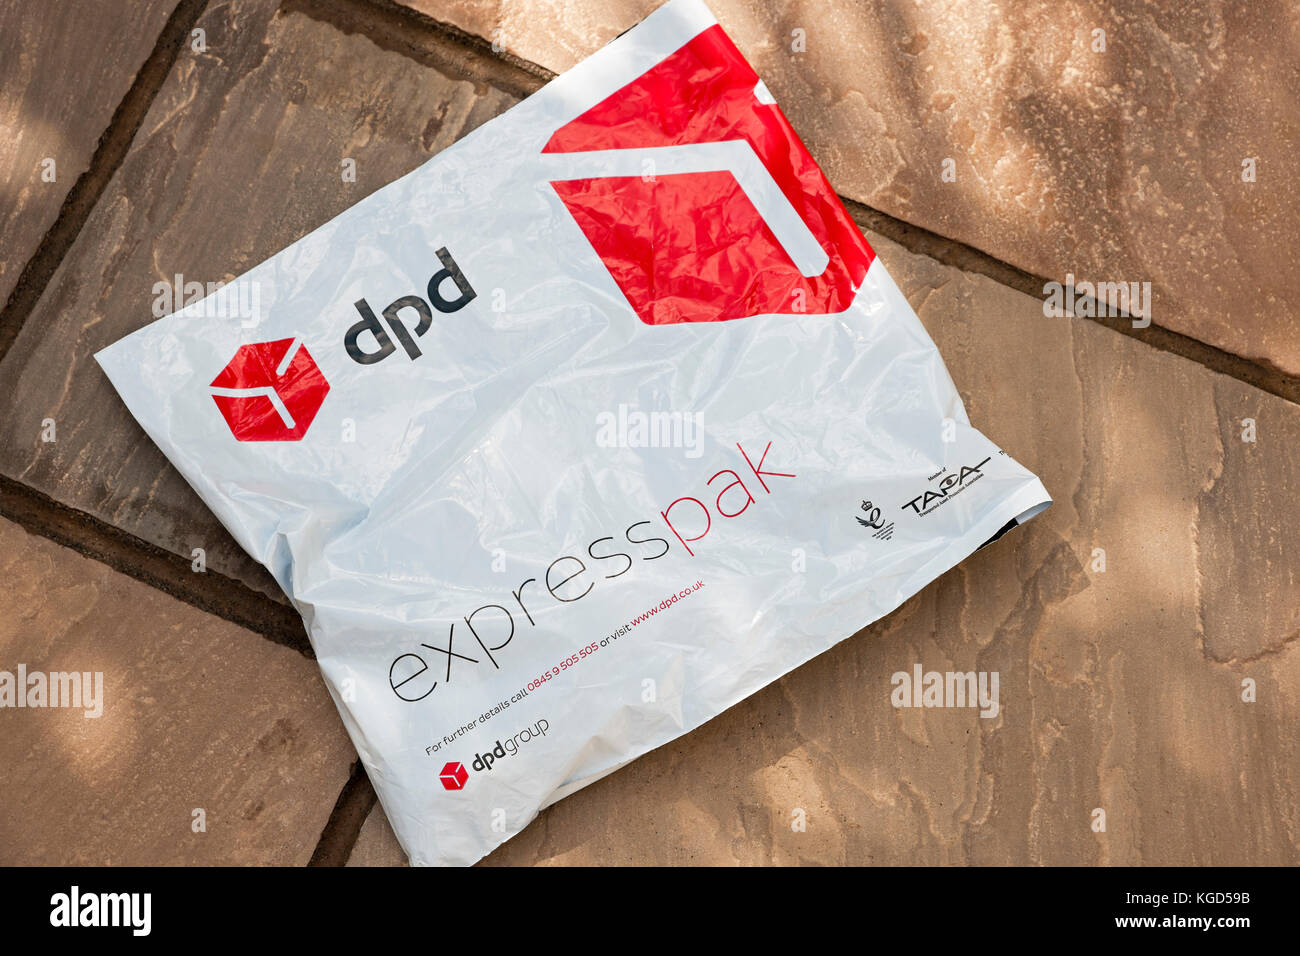 DPD expresspak package Stock Photo - Alamy